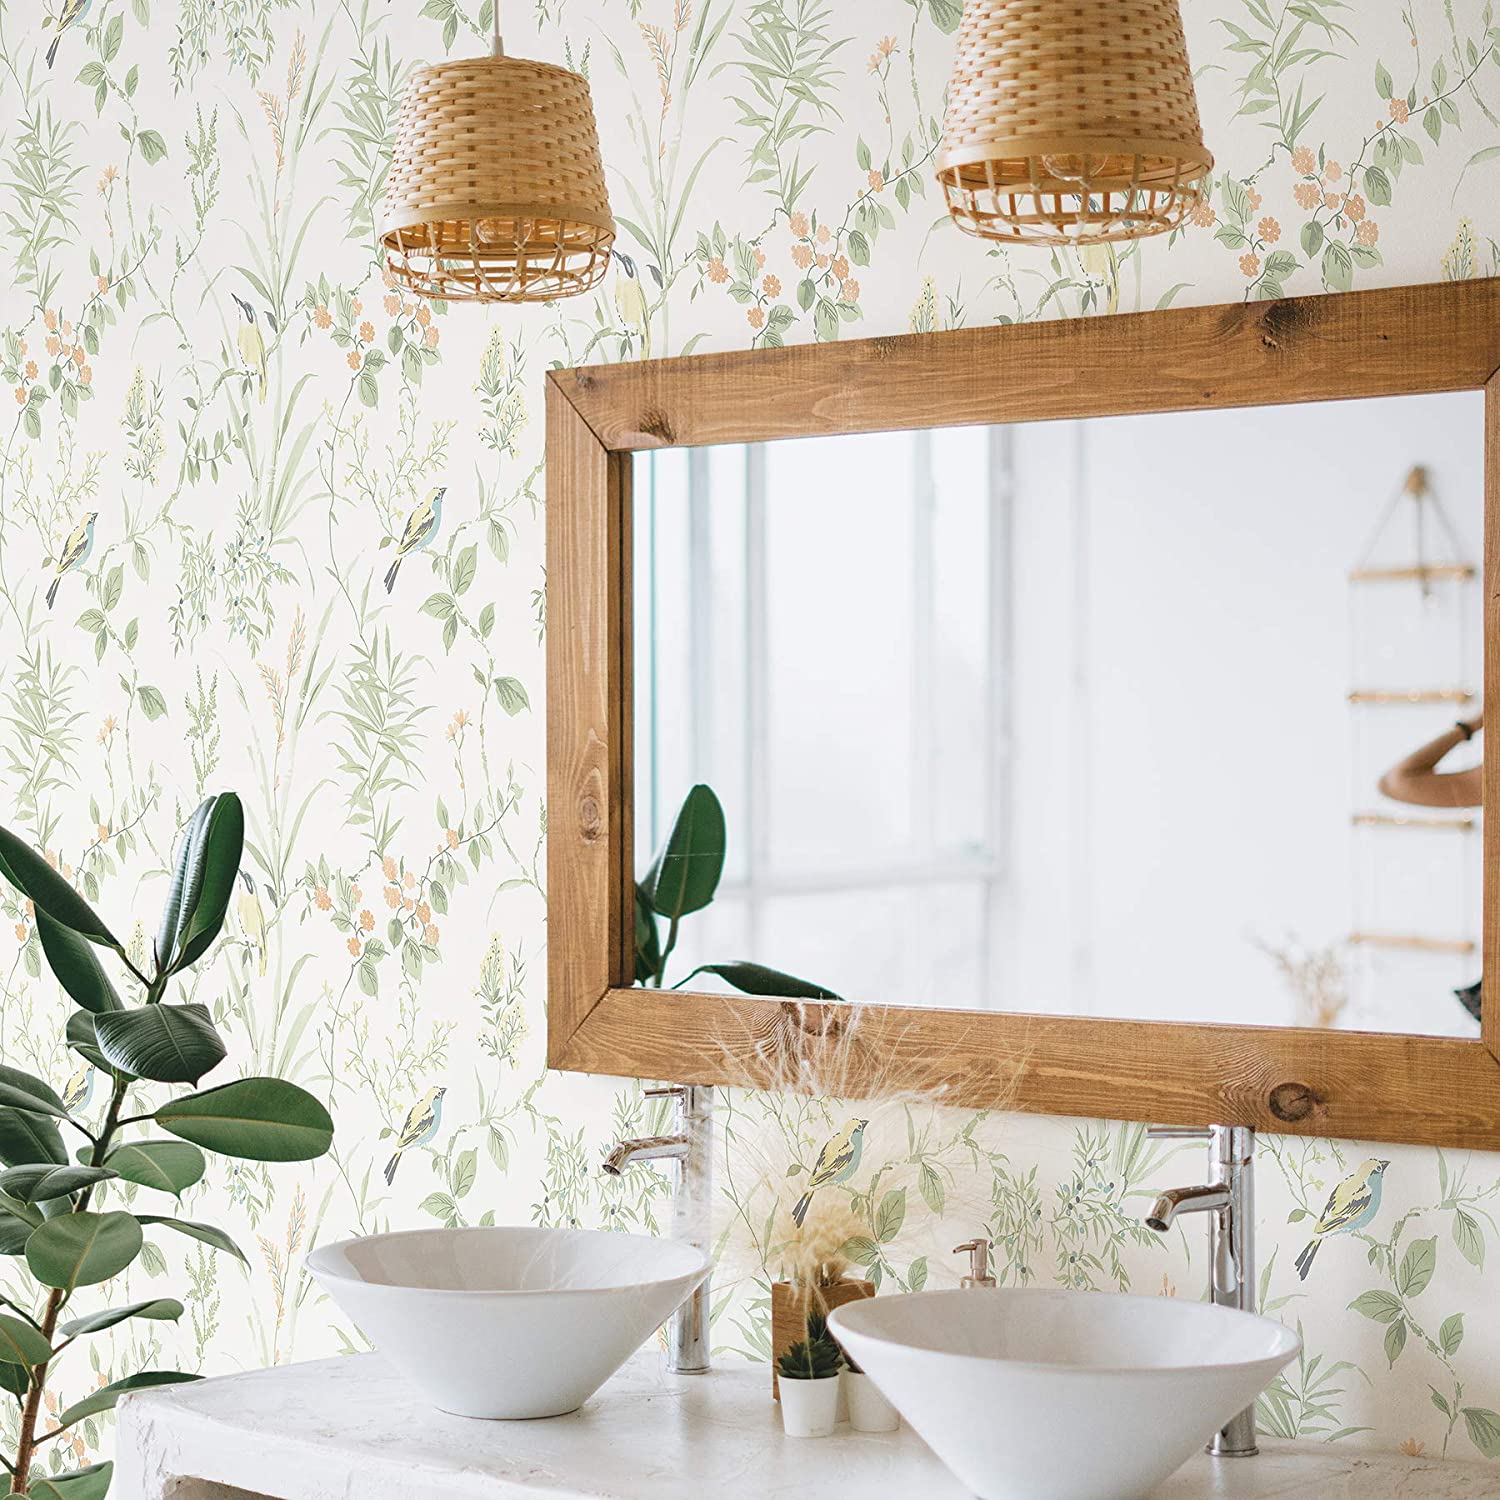 Bathroom Wallpaper Ideas That Are Certain To Inspire - Décor Aid